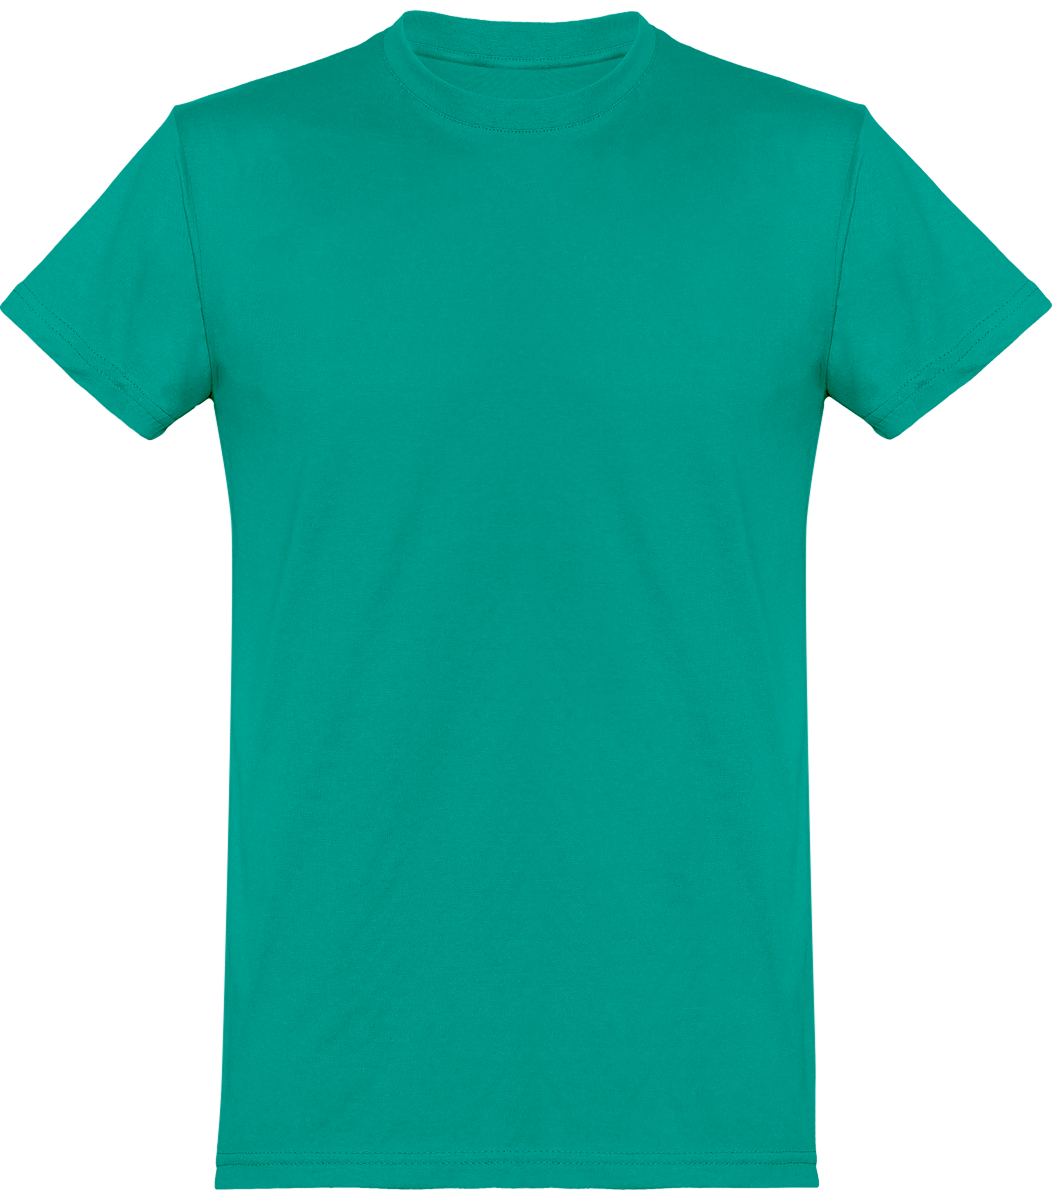 Men's Basic Cut 100% Cotton Tee To Customize Real Turquoise